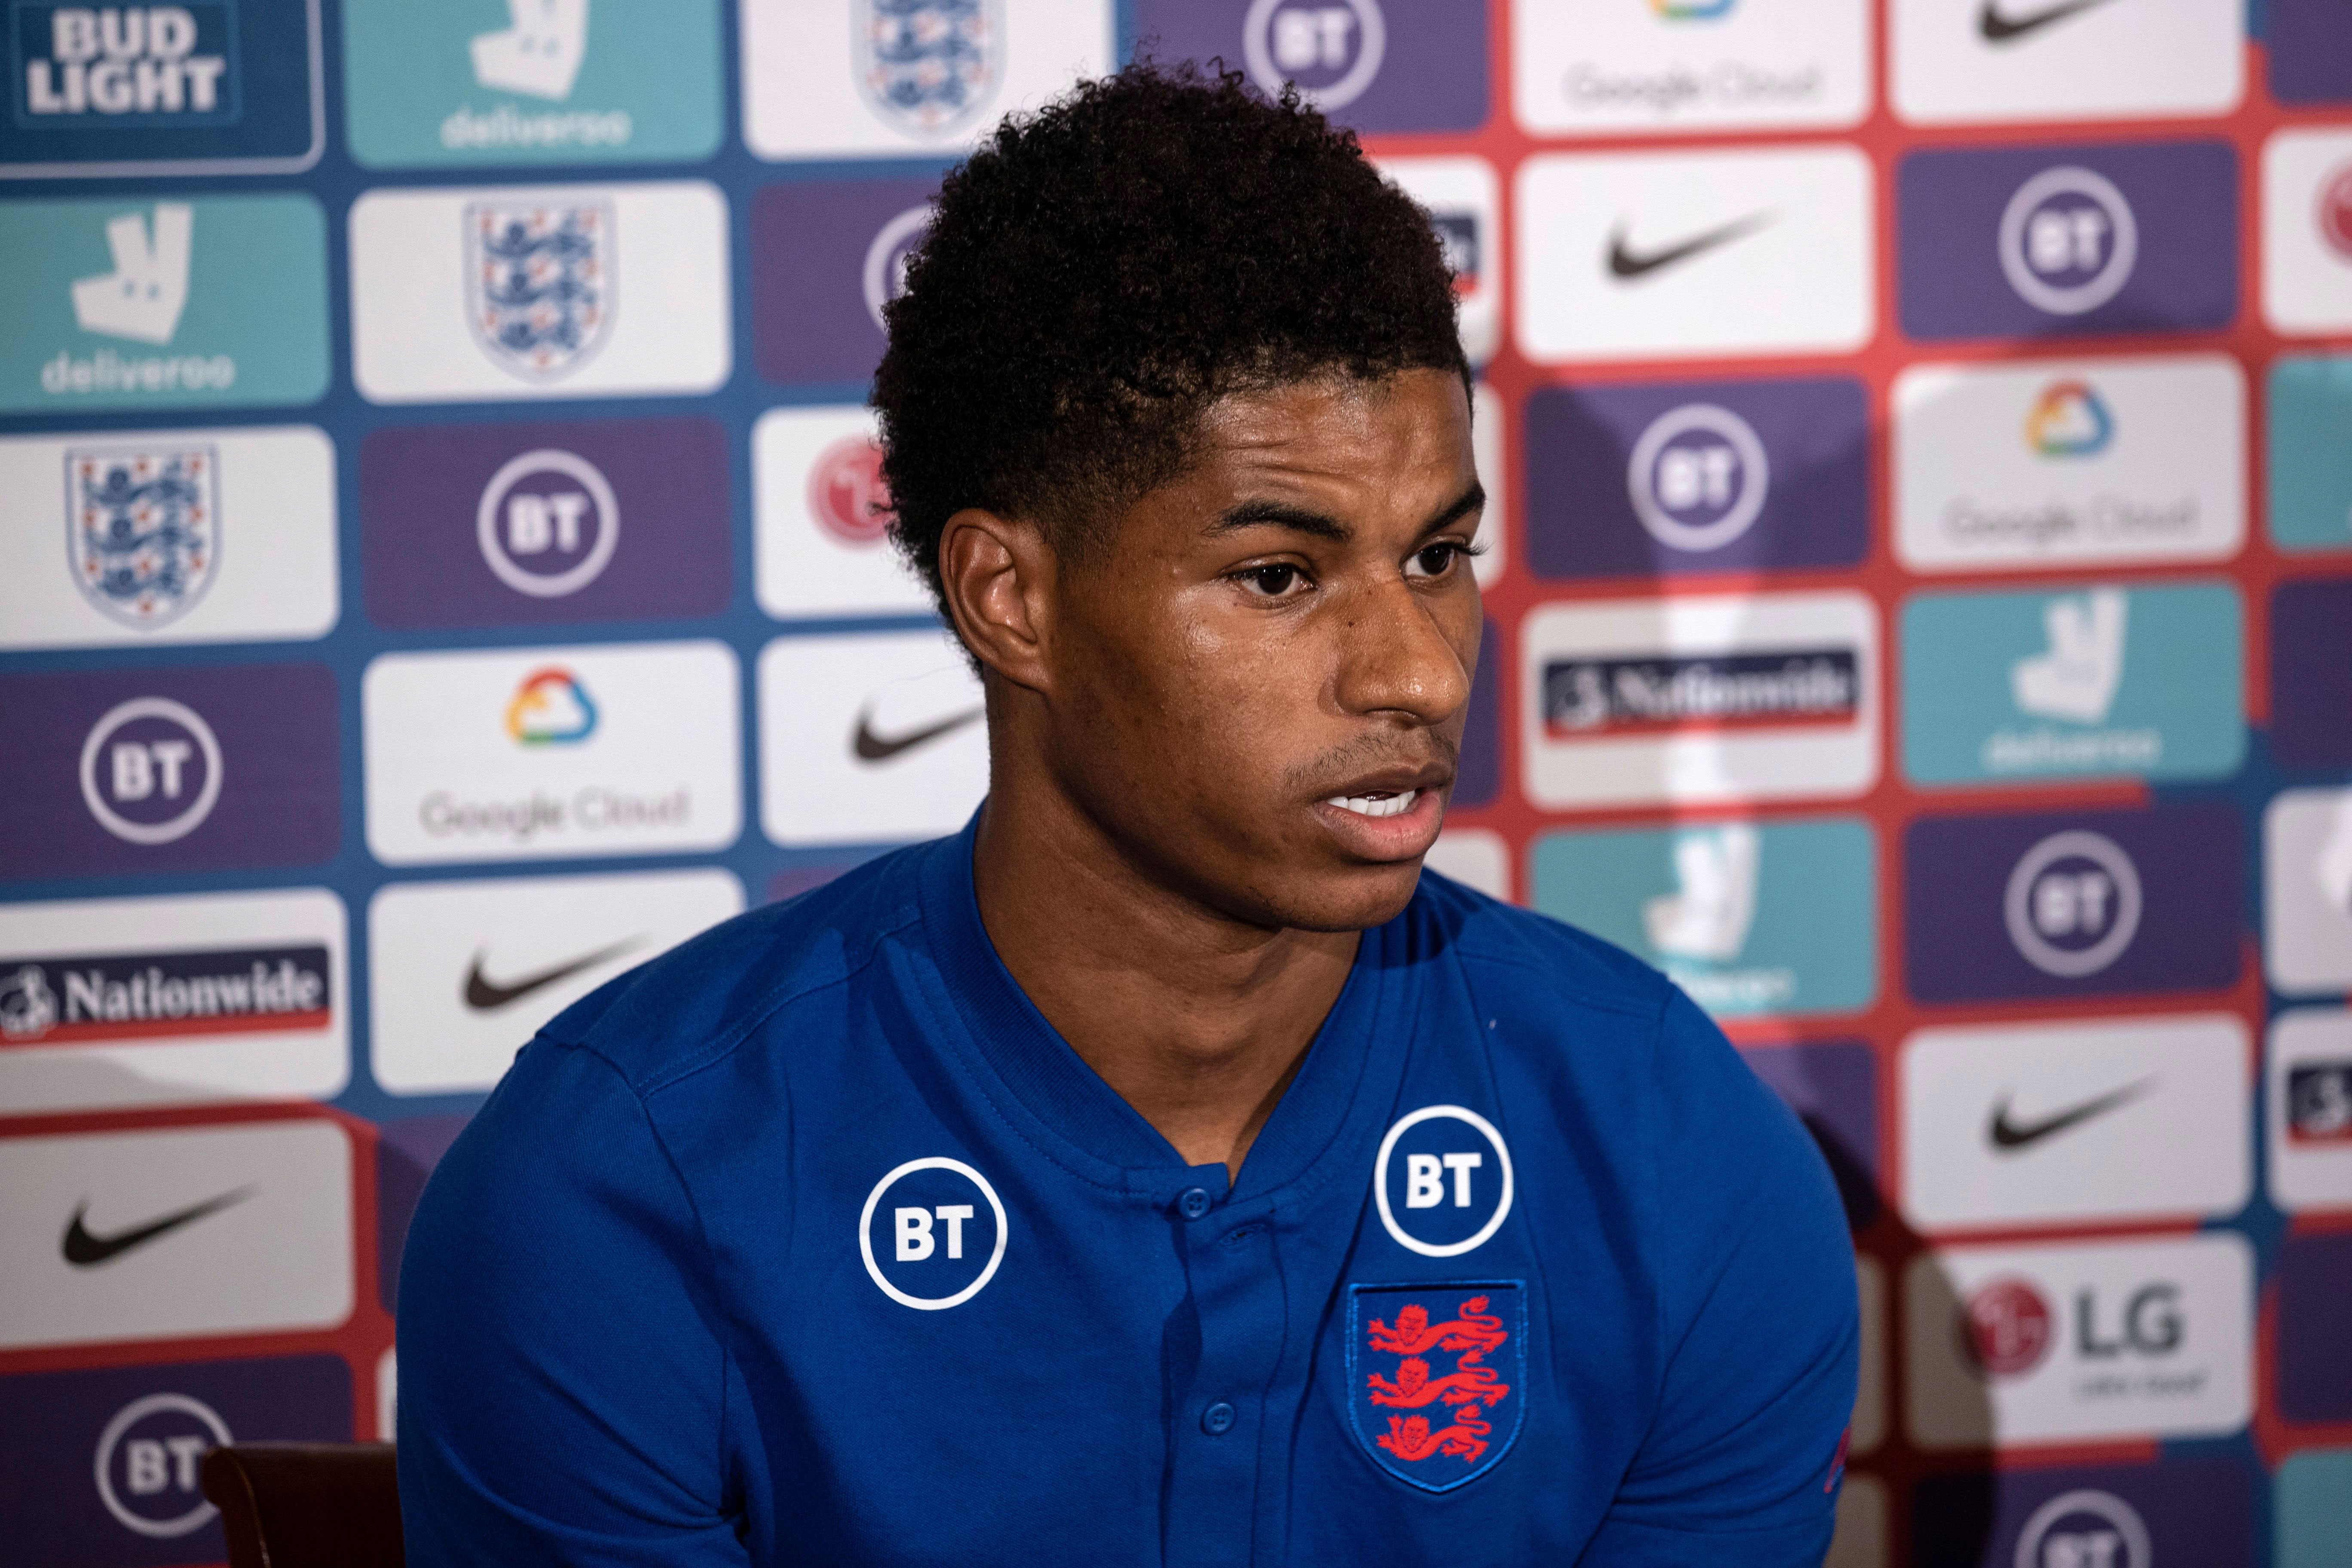 England and Manchester United striker Marcus Rashford speaks at a press conference in Surrey, England, on October 13.